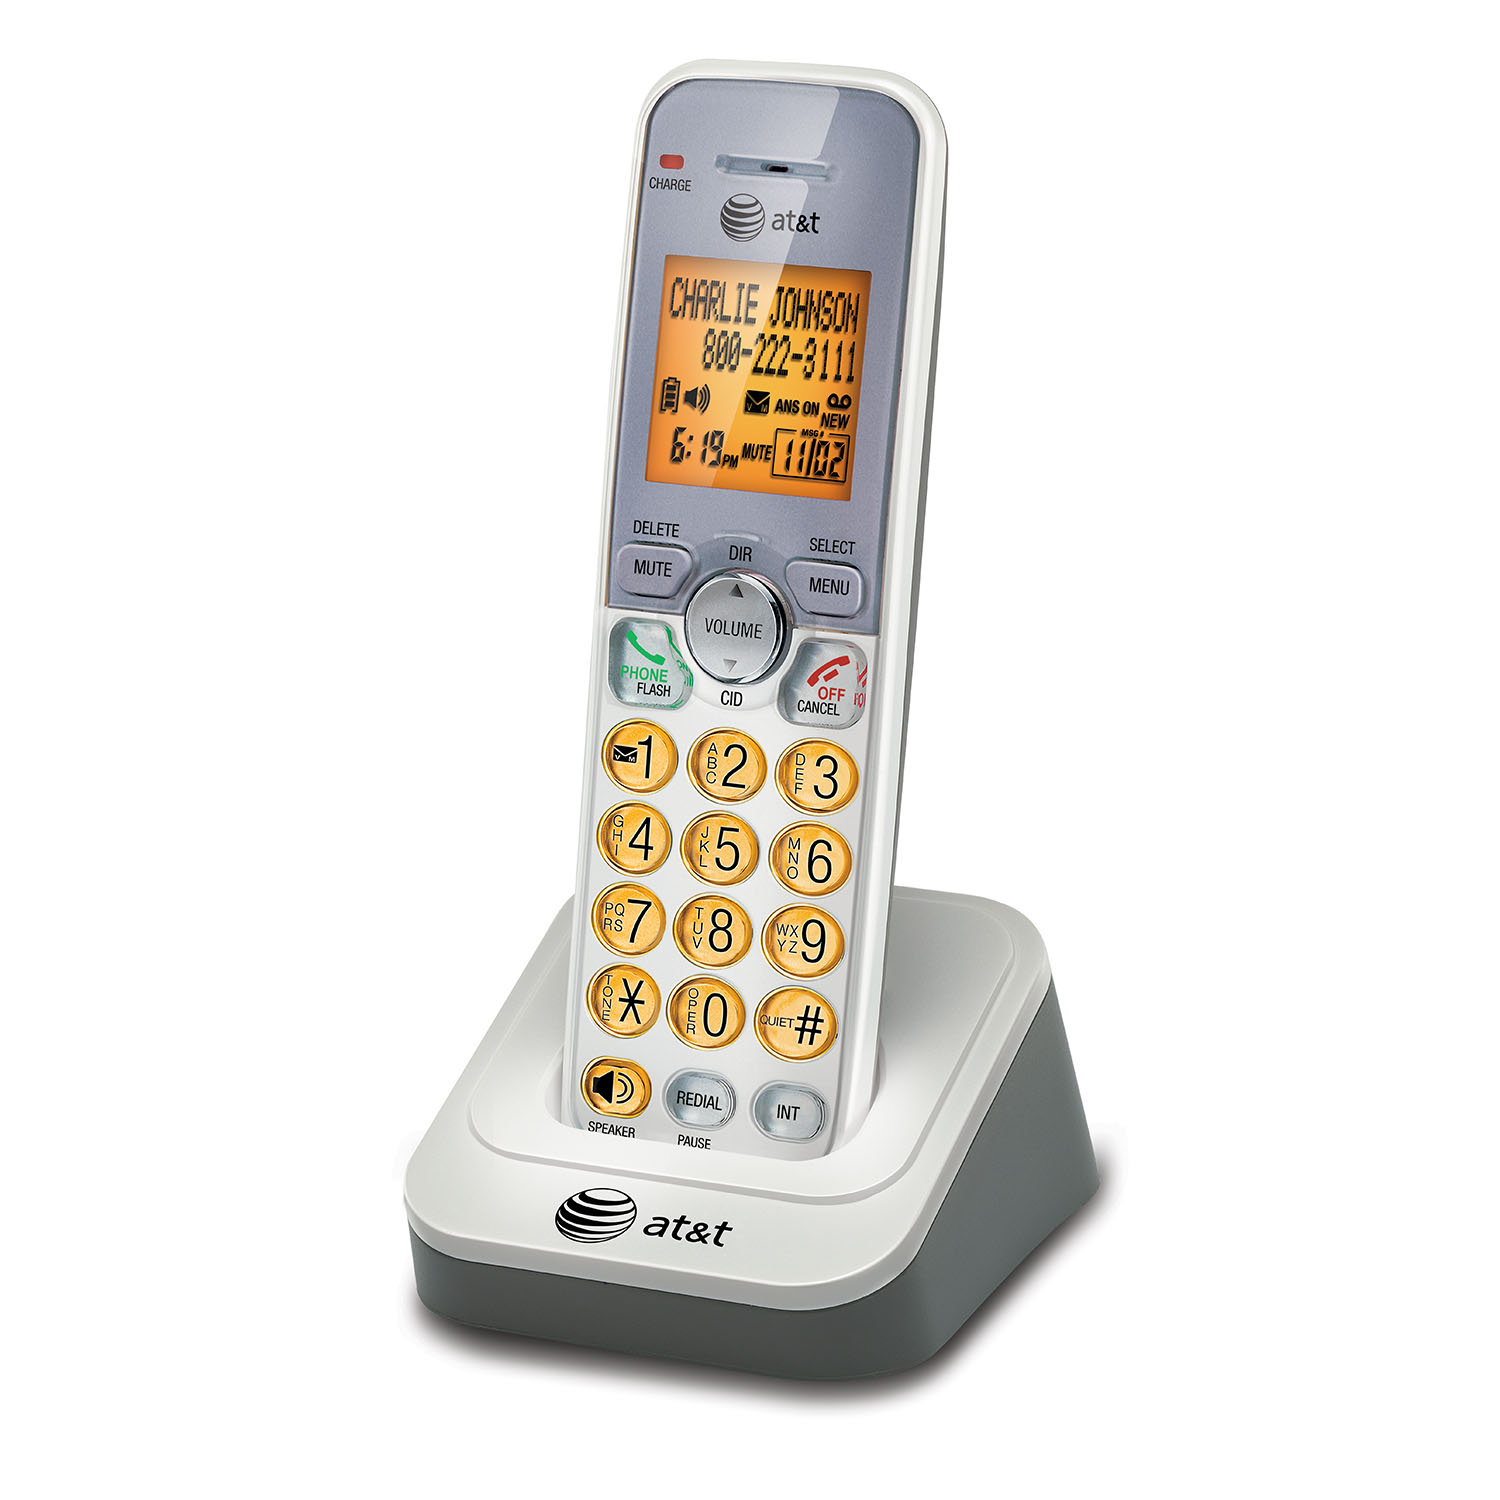 5 handset cordless answering system with caller ID/call waiting - view 7